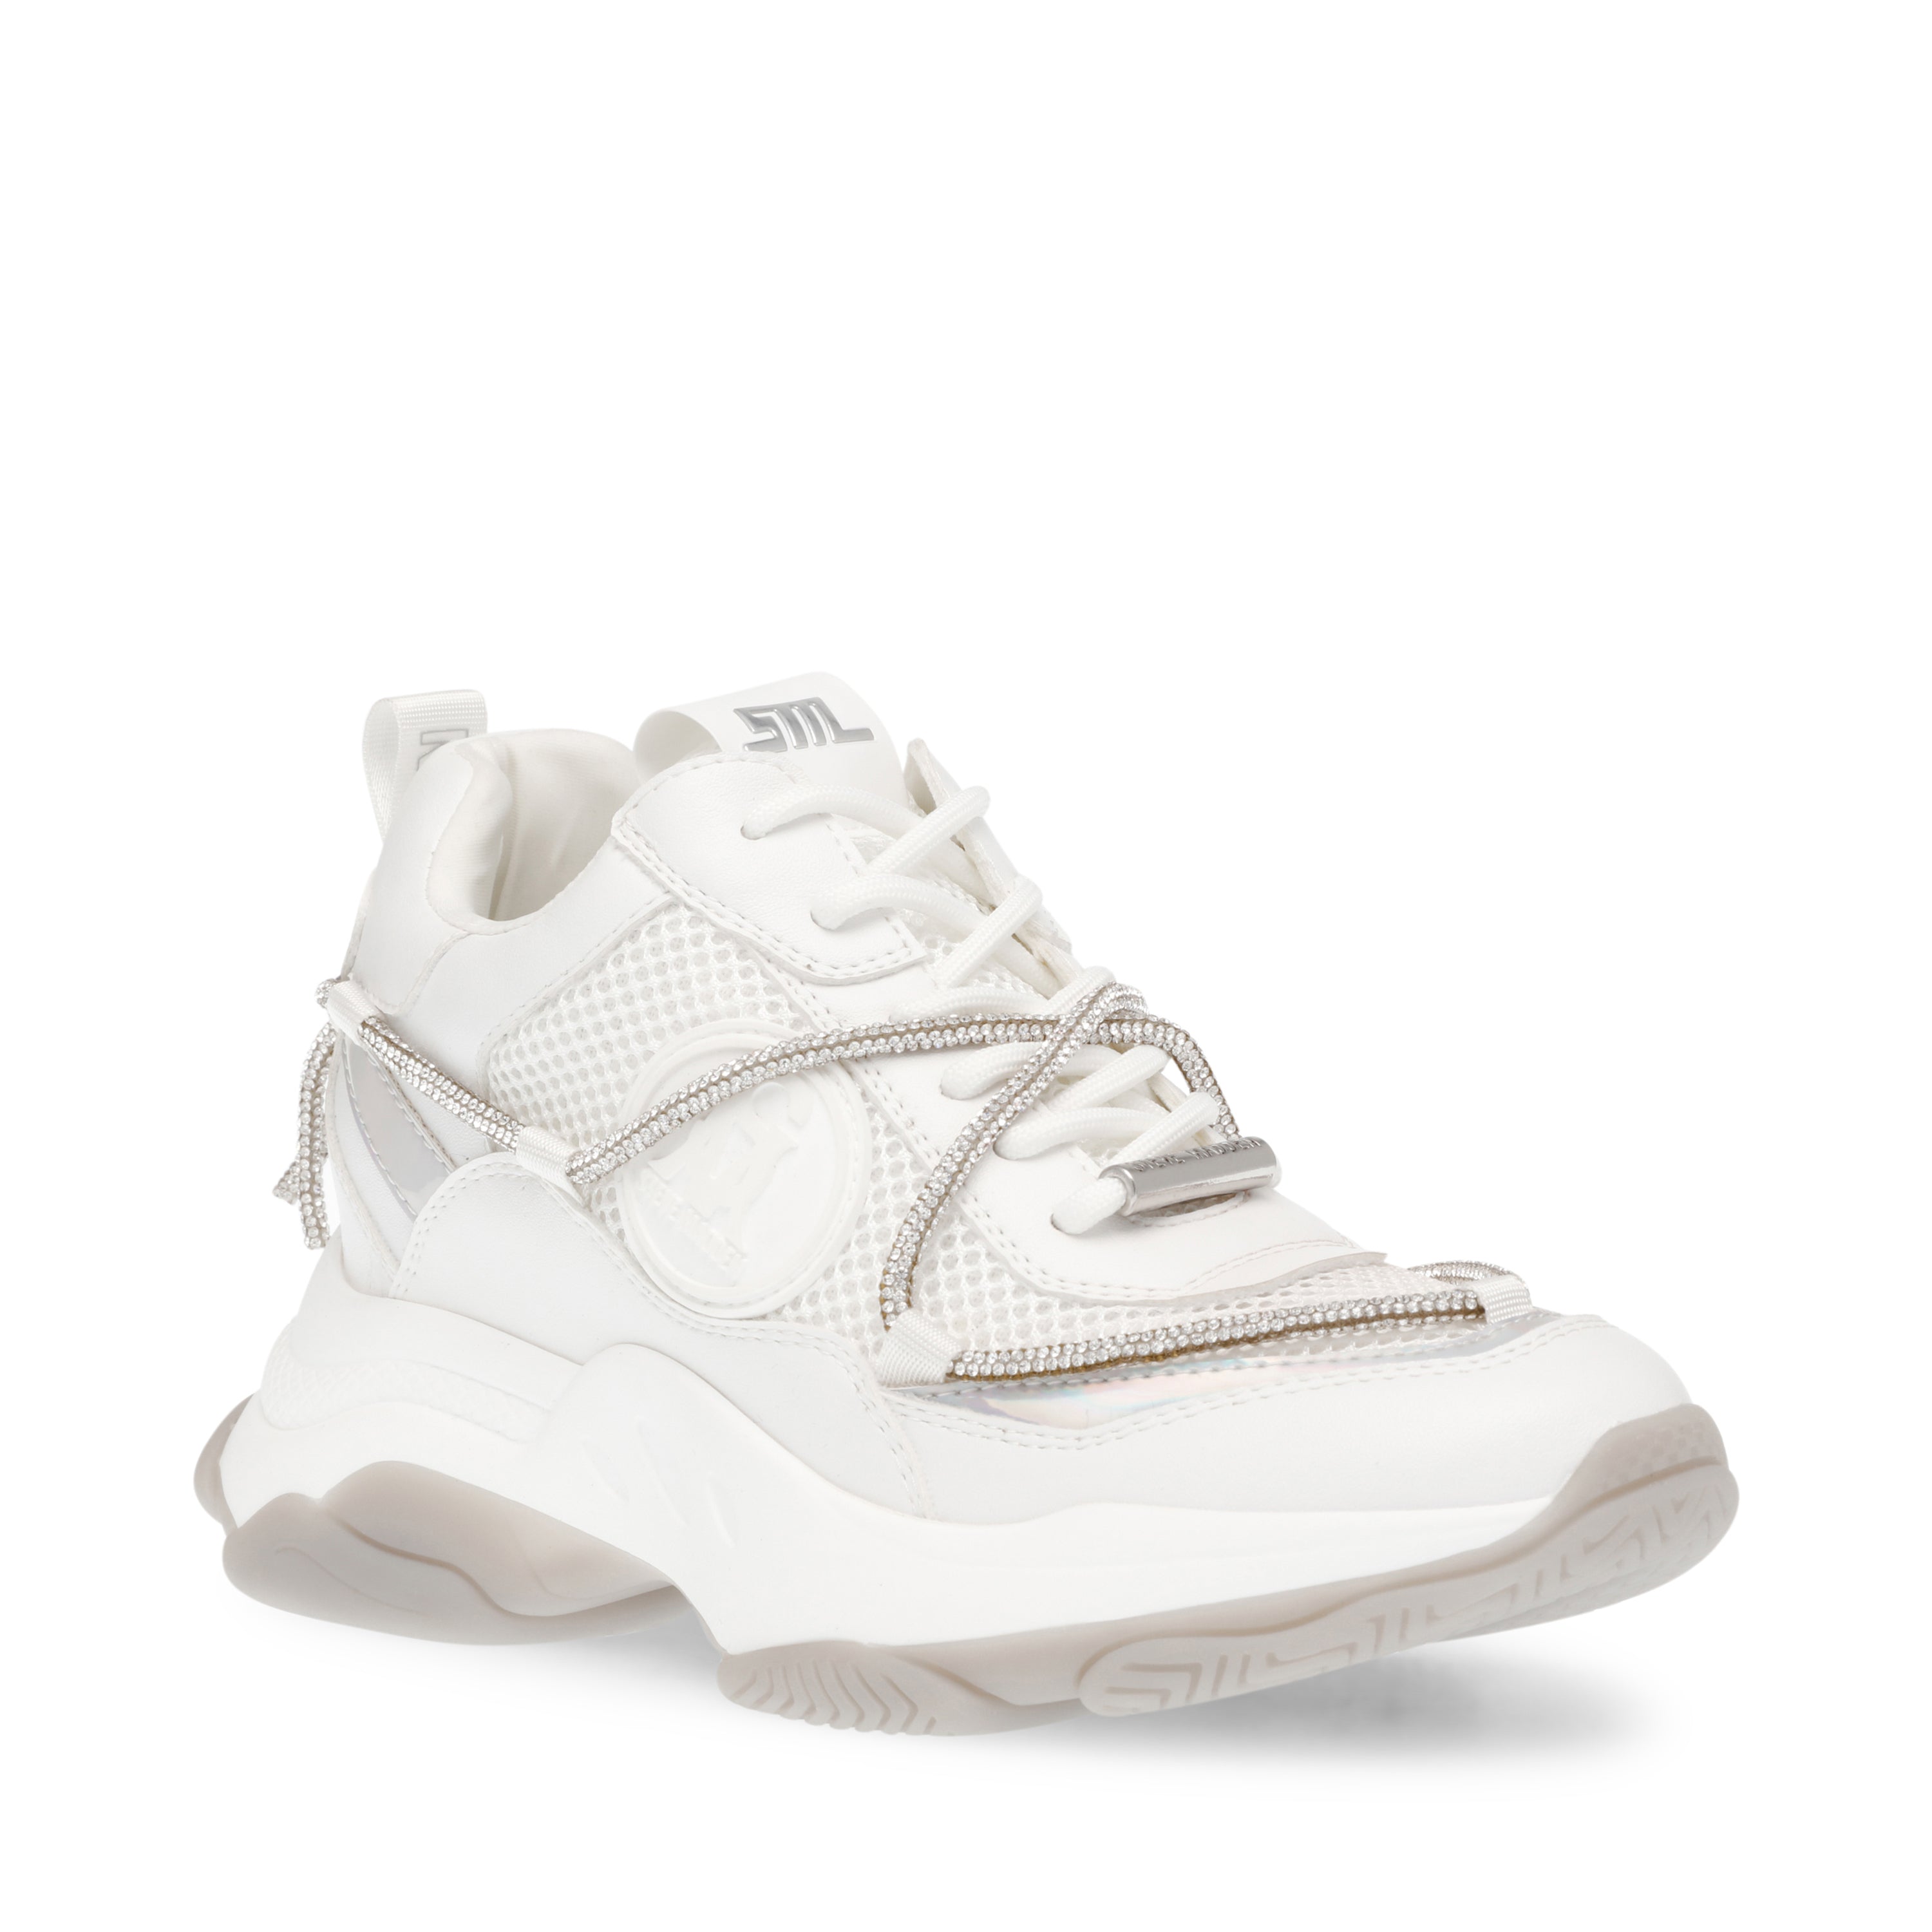 MOTOCROSS WHITE/SILVER SNEAKERS- Hover Image